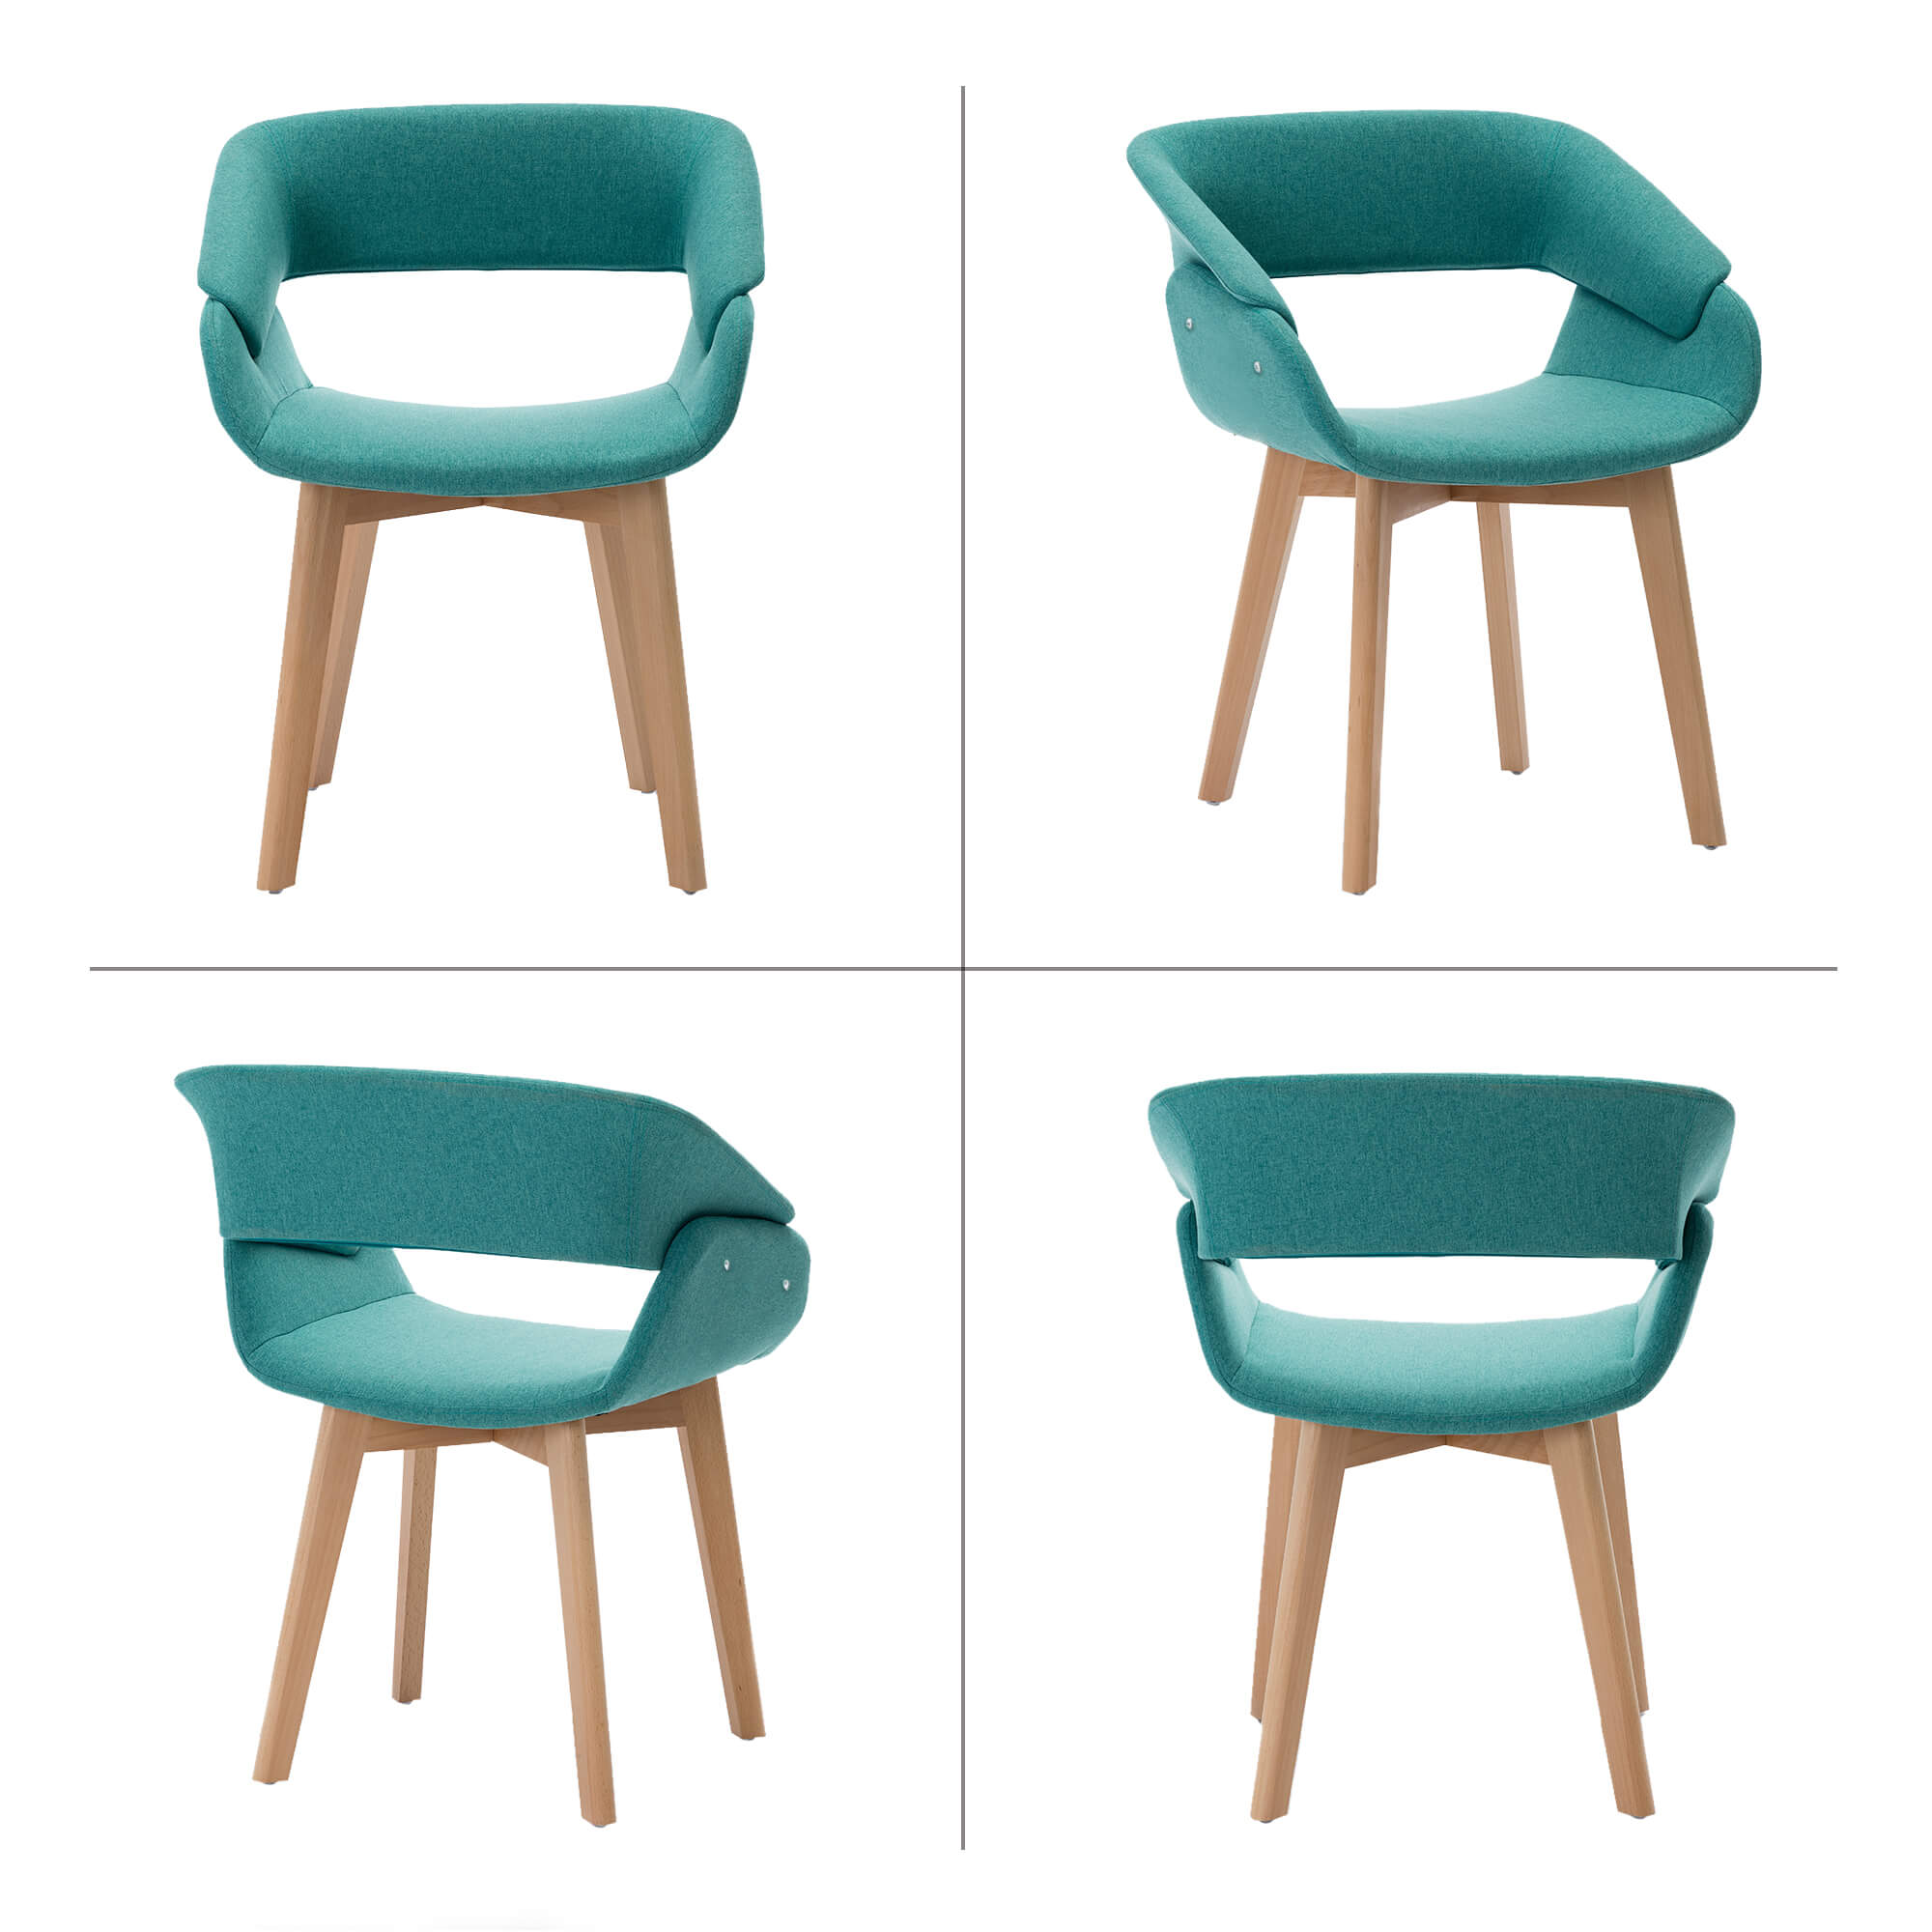 Ivinta Modern Dining Room Chair Set of 2 for Kitchen, Mid-Century Accent Chairs